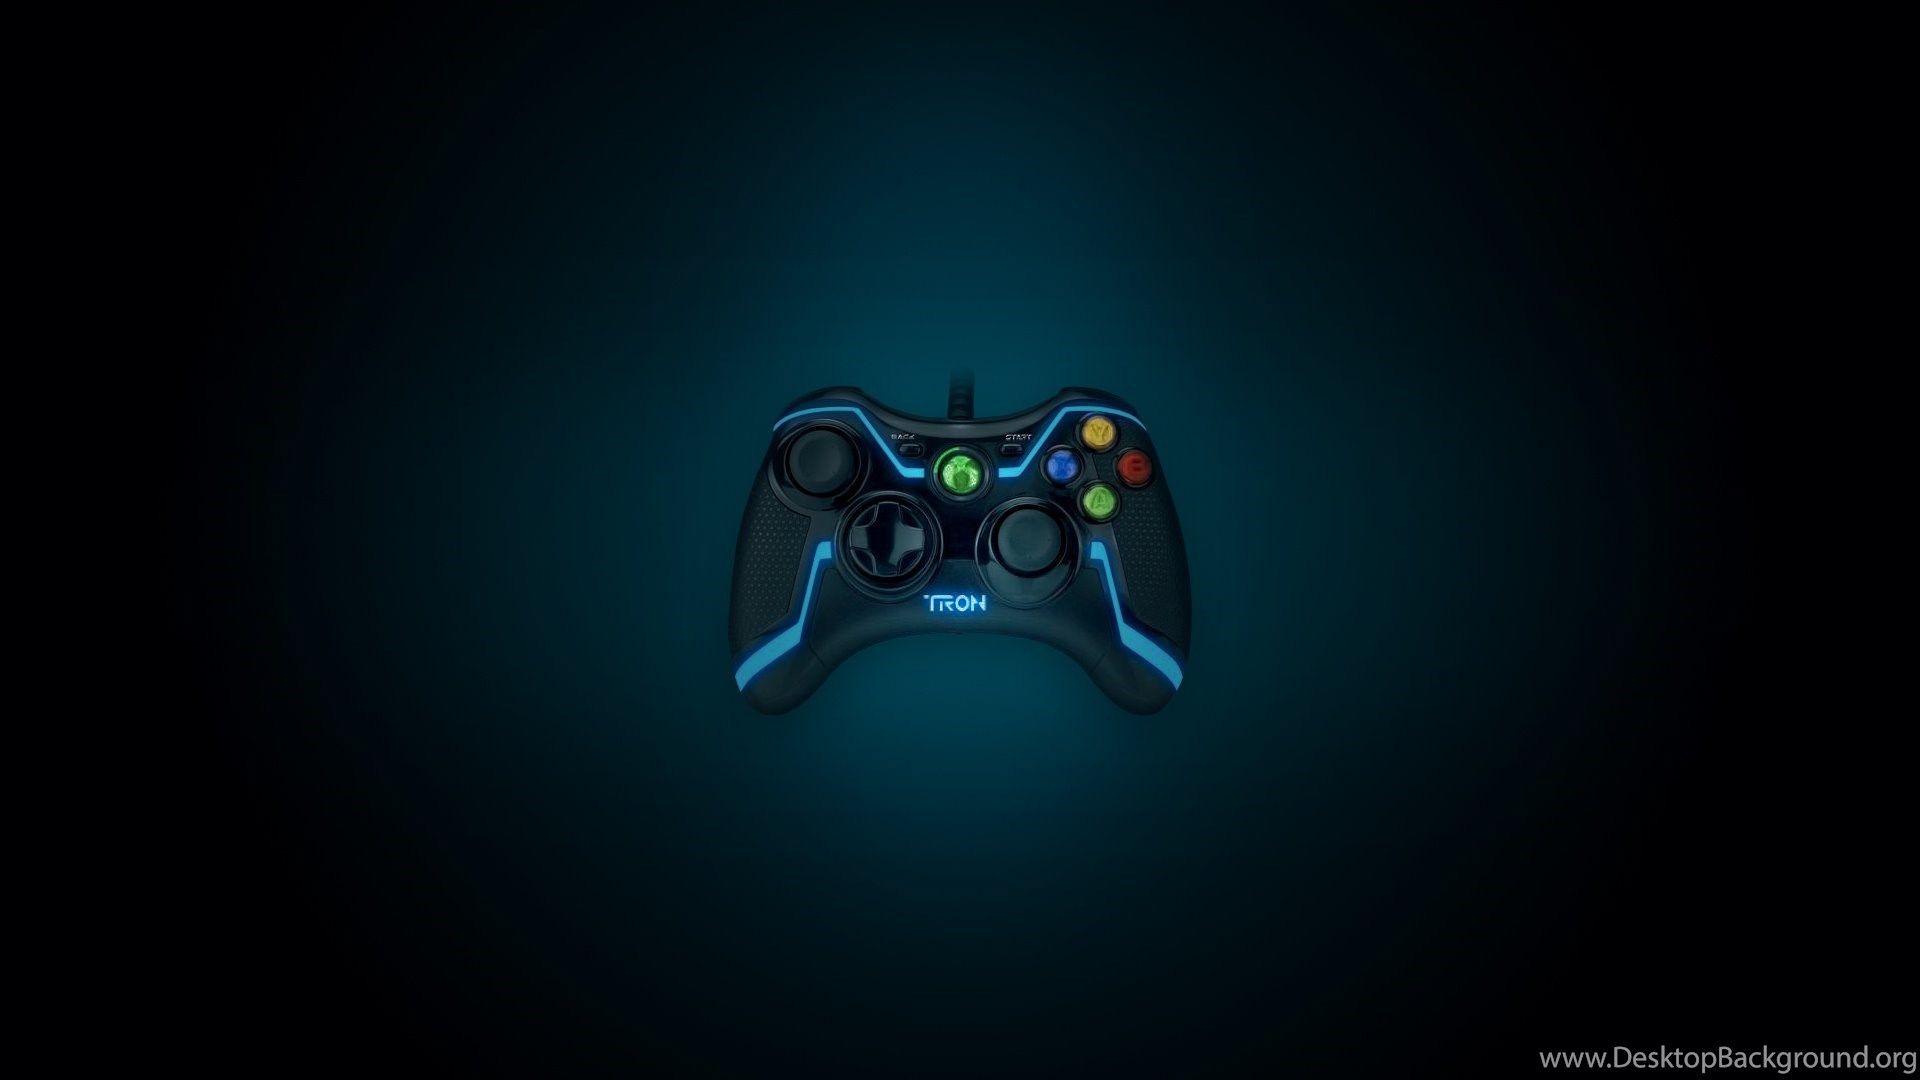 Download Wallpaper Xbox, Game Pad, The Throne, Tron, Style, Neon. Desktop Background